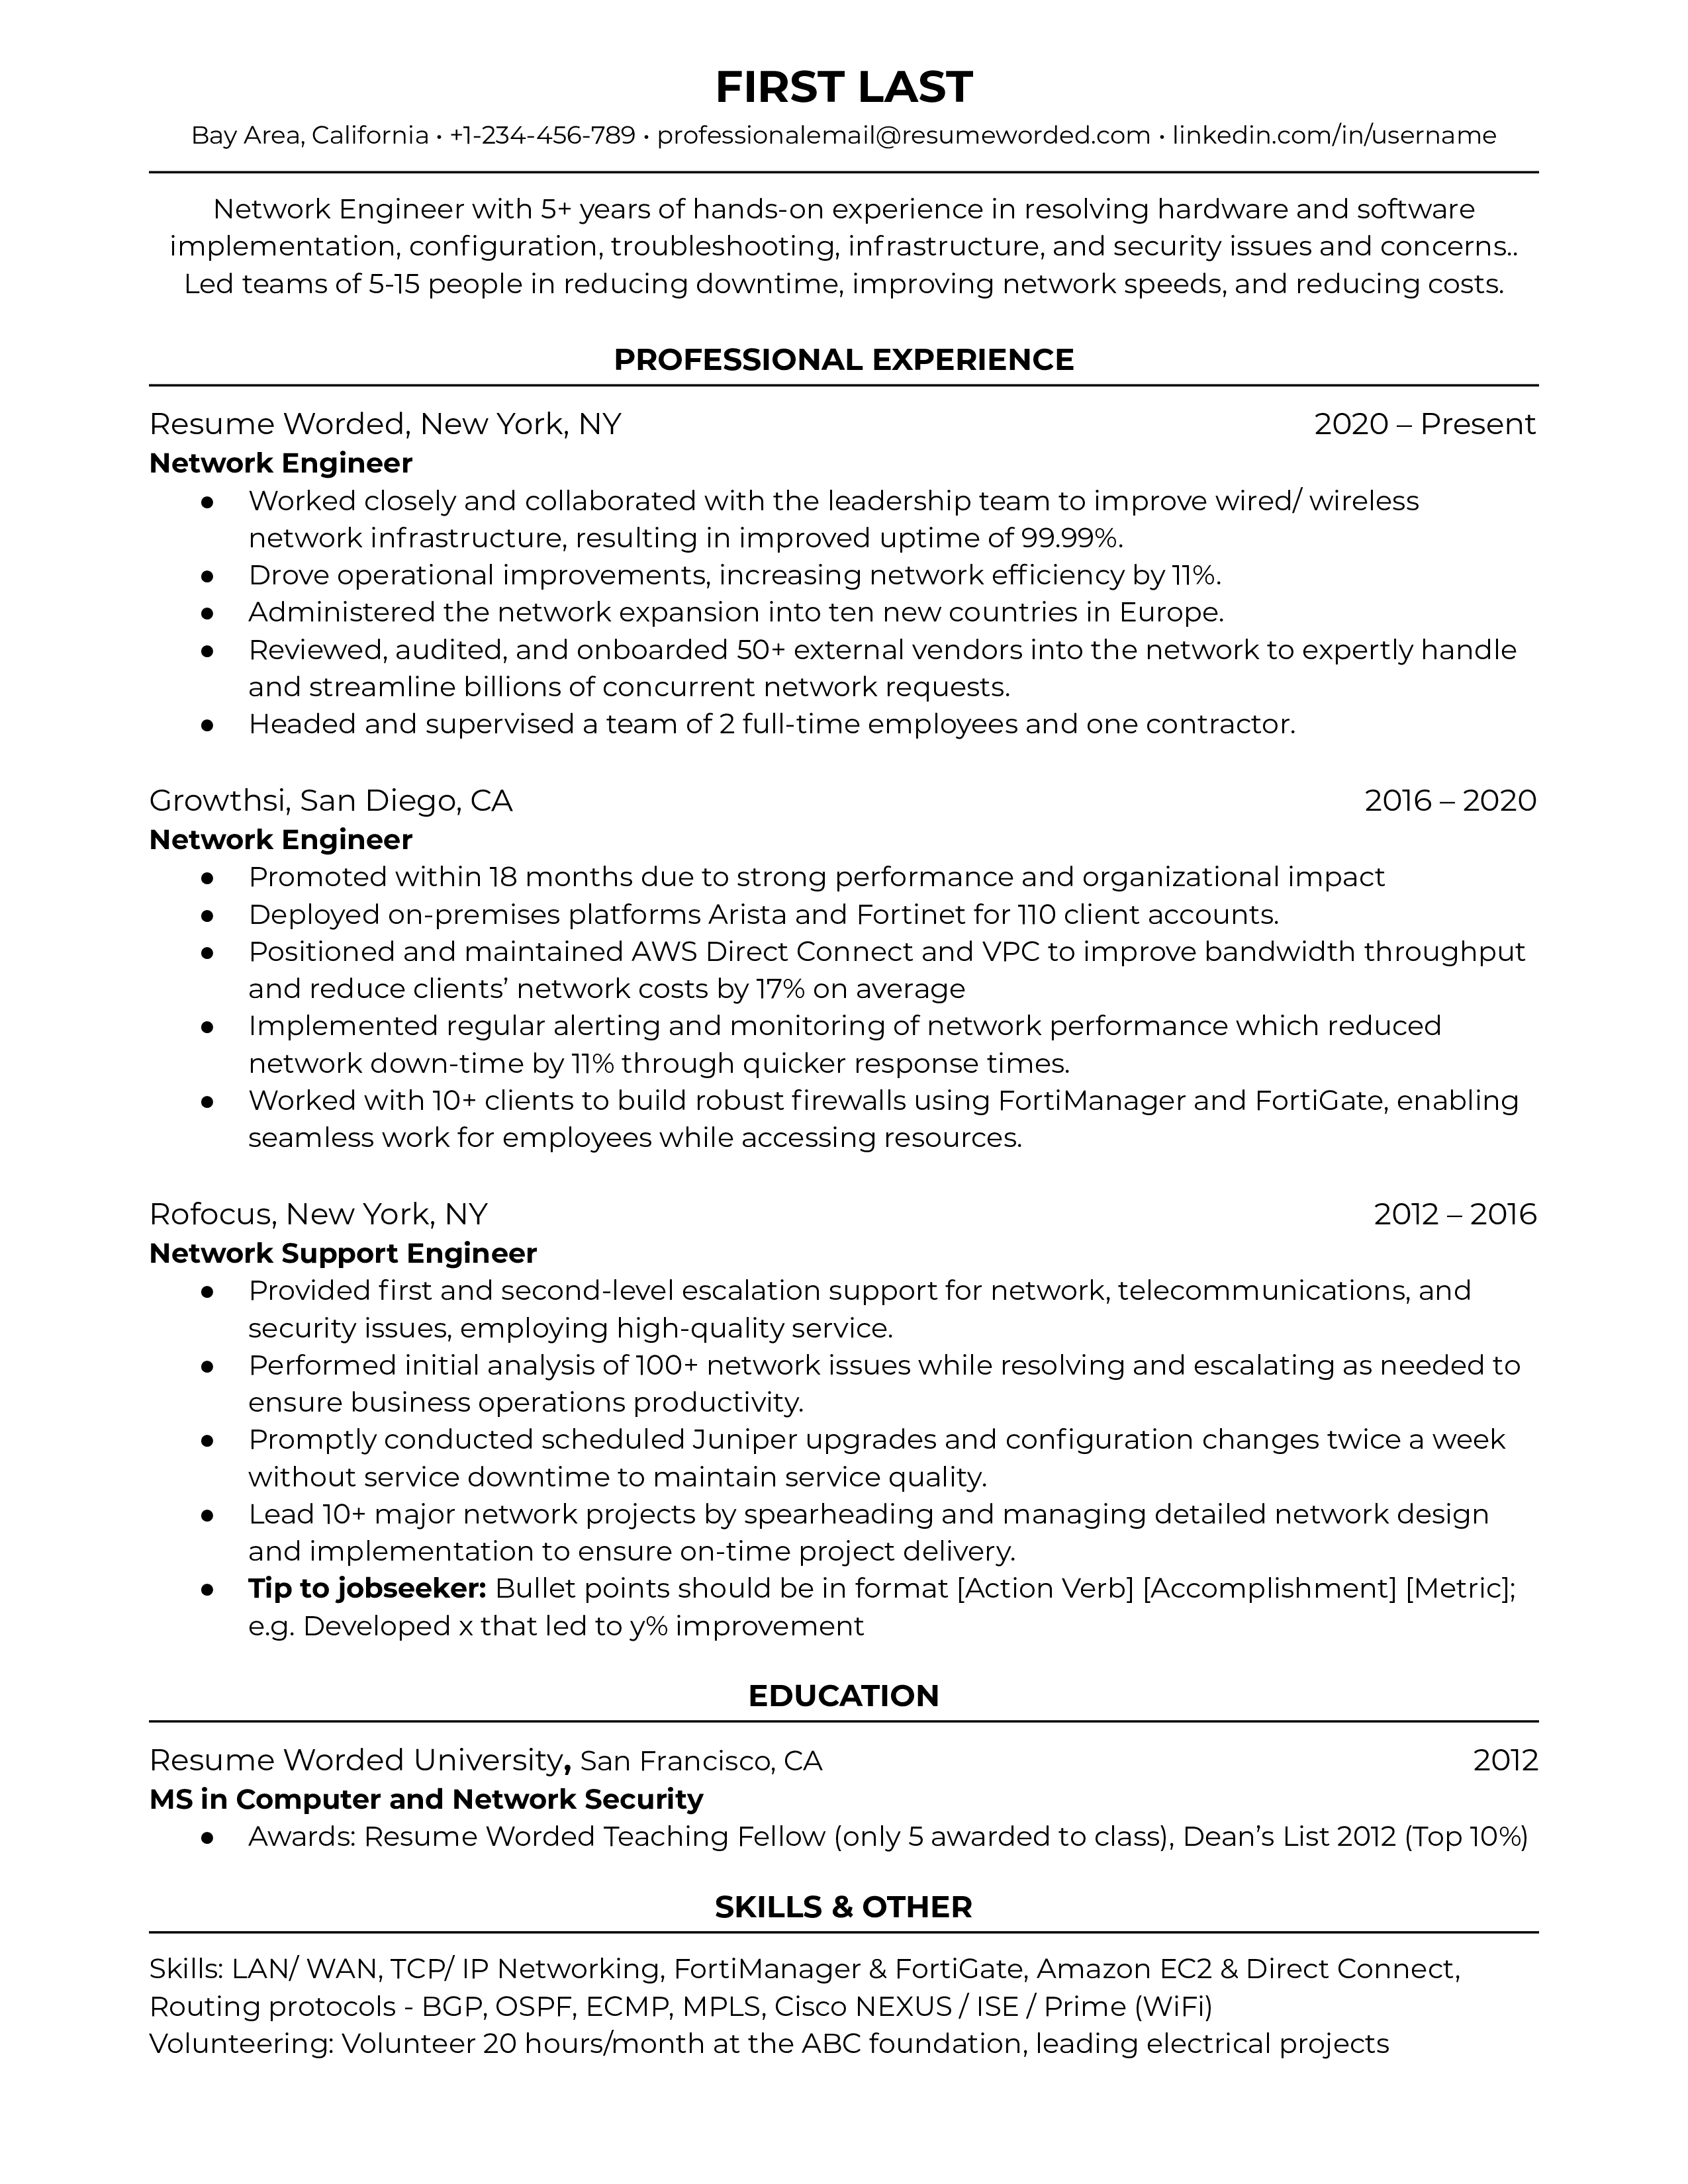 Network engineer resume with achievement data and hard skills section